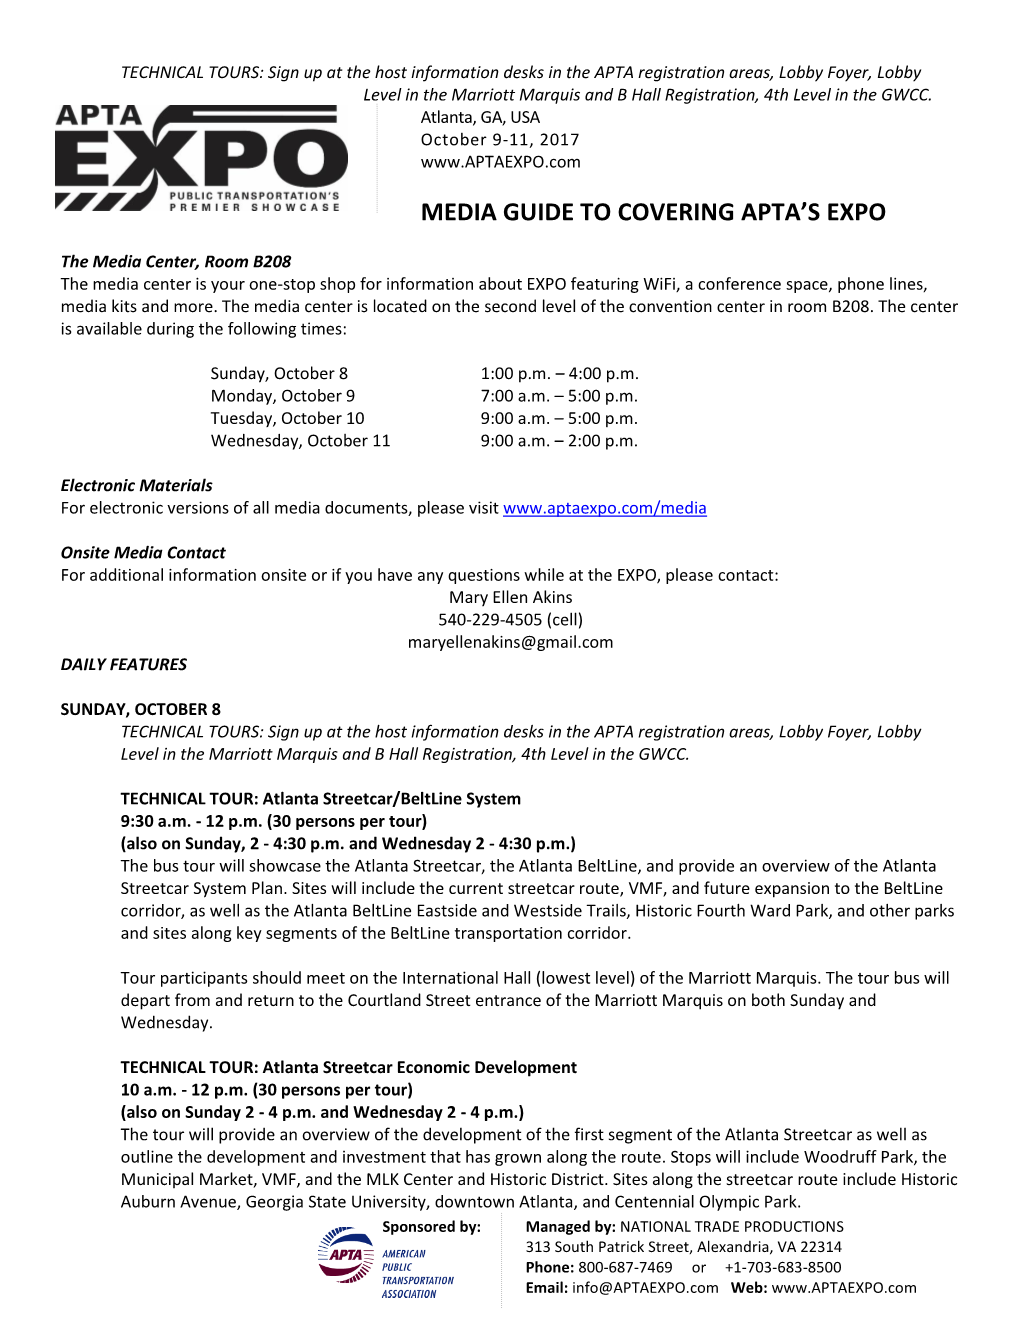 Media Guide to Covering EXPO 2017